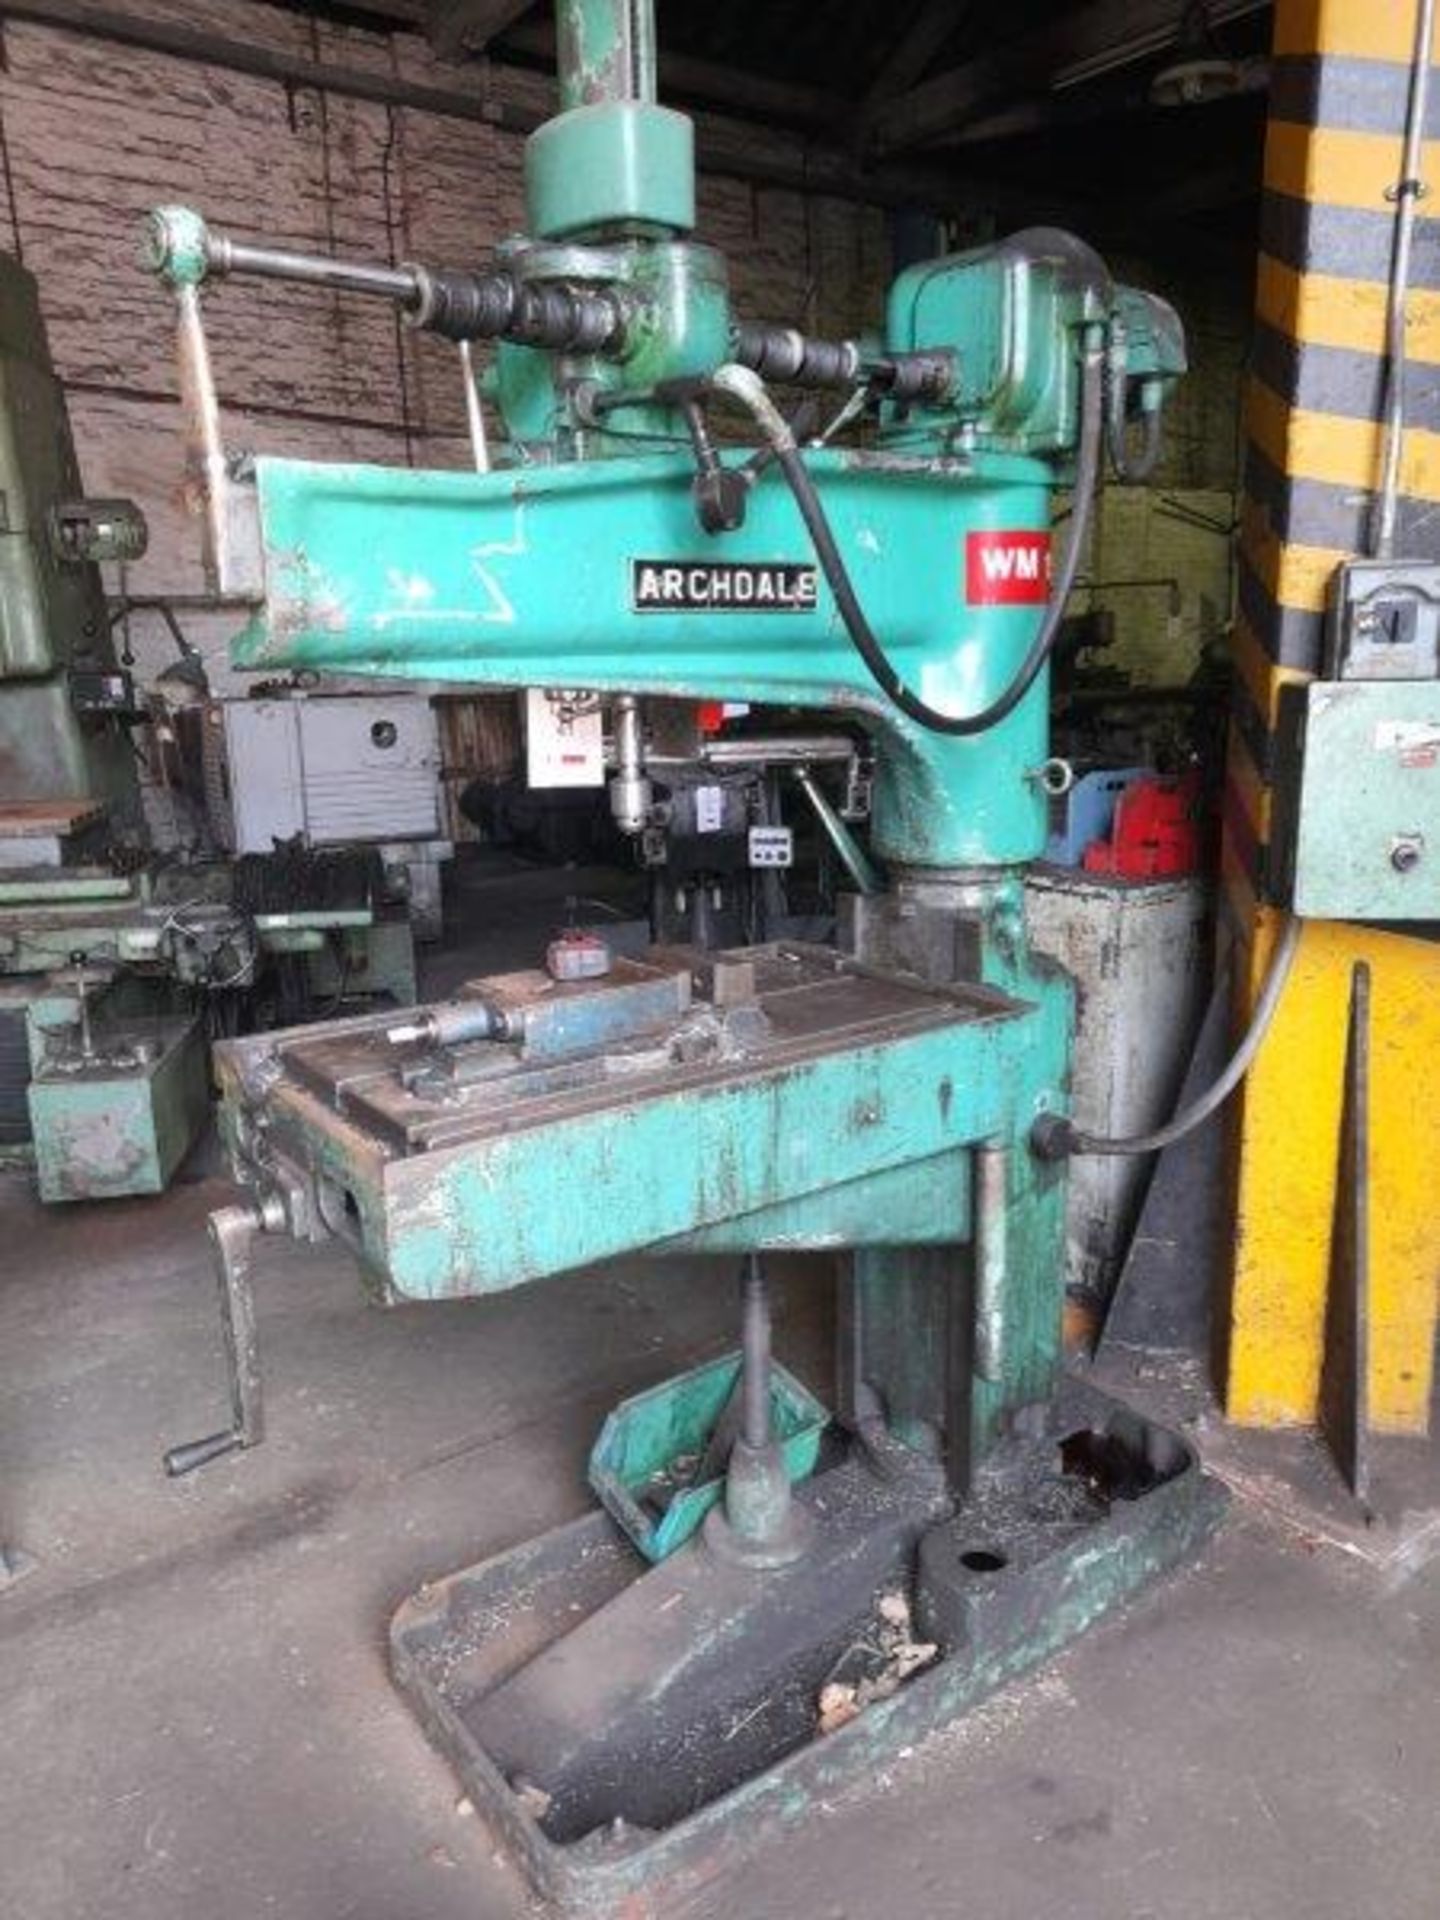 Archdale WM 15 radial arm drill, Serial No: RD13948, 32" x 18.3" table size.(Please note: this lot